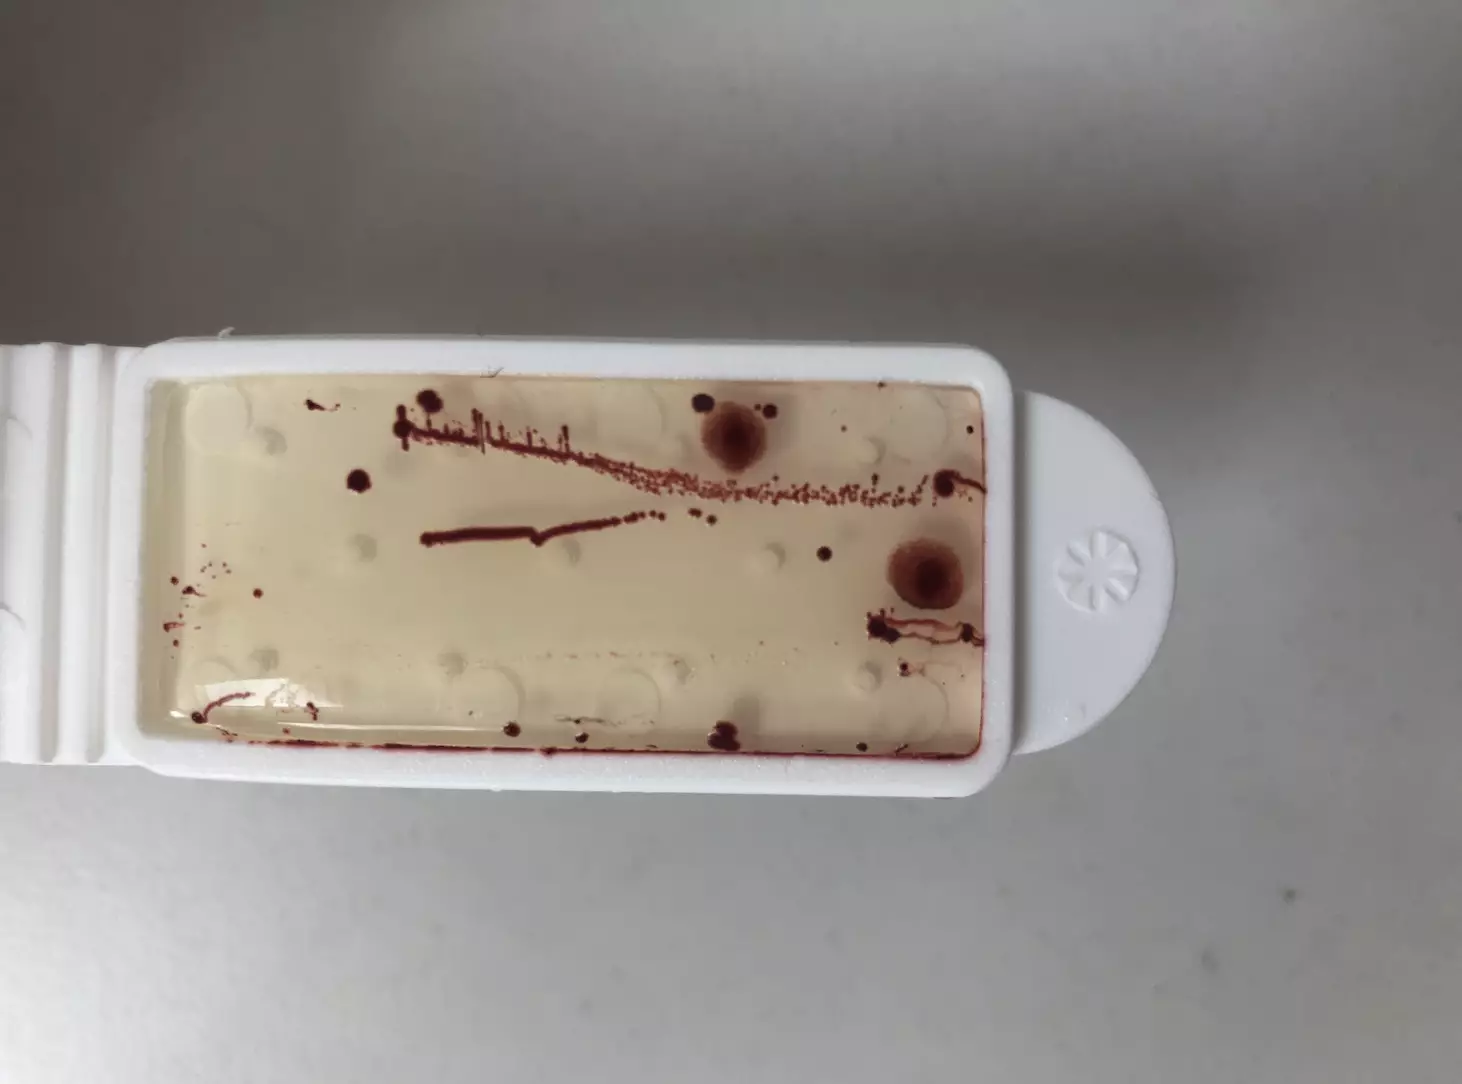 A swab showing the bacteria found on the driver's seat of a family car.